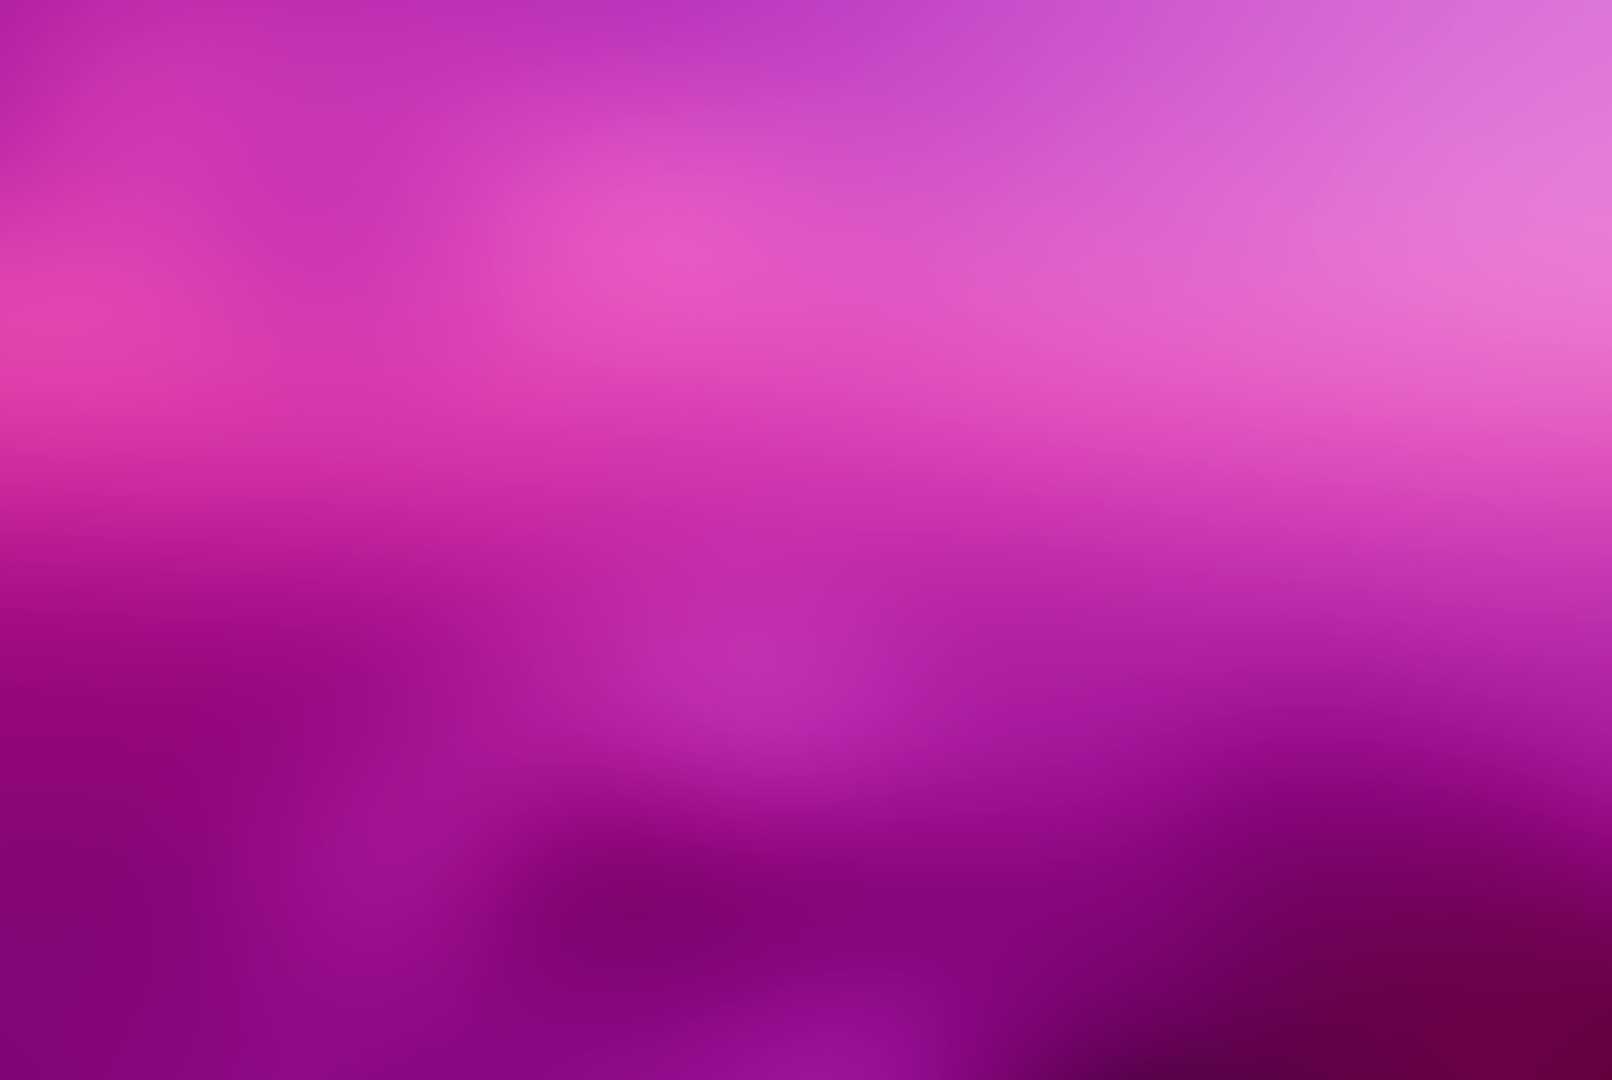 Pink And Purple Clouds Background Fuschia and pink background